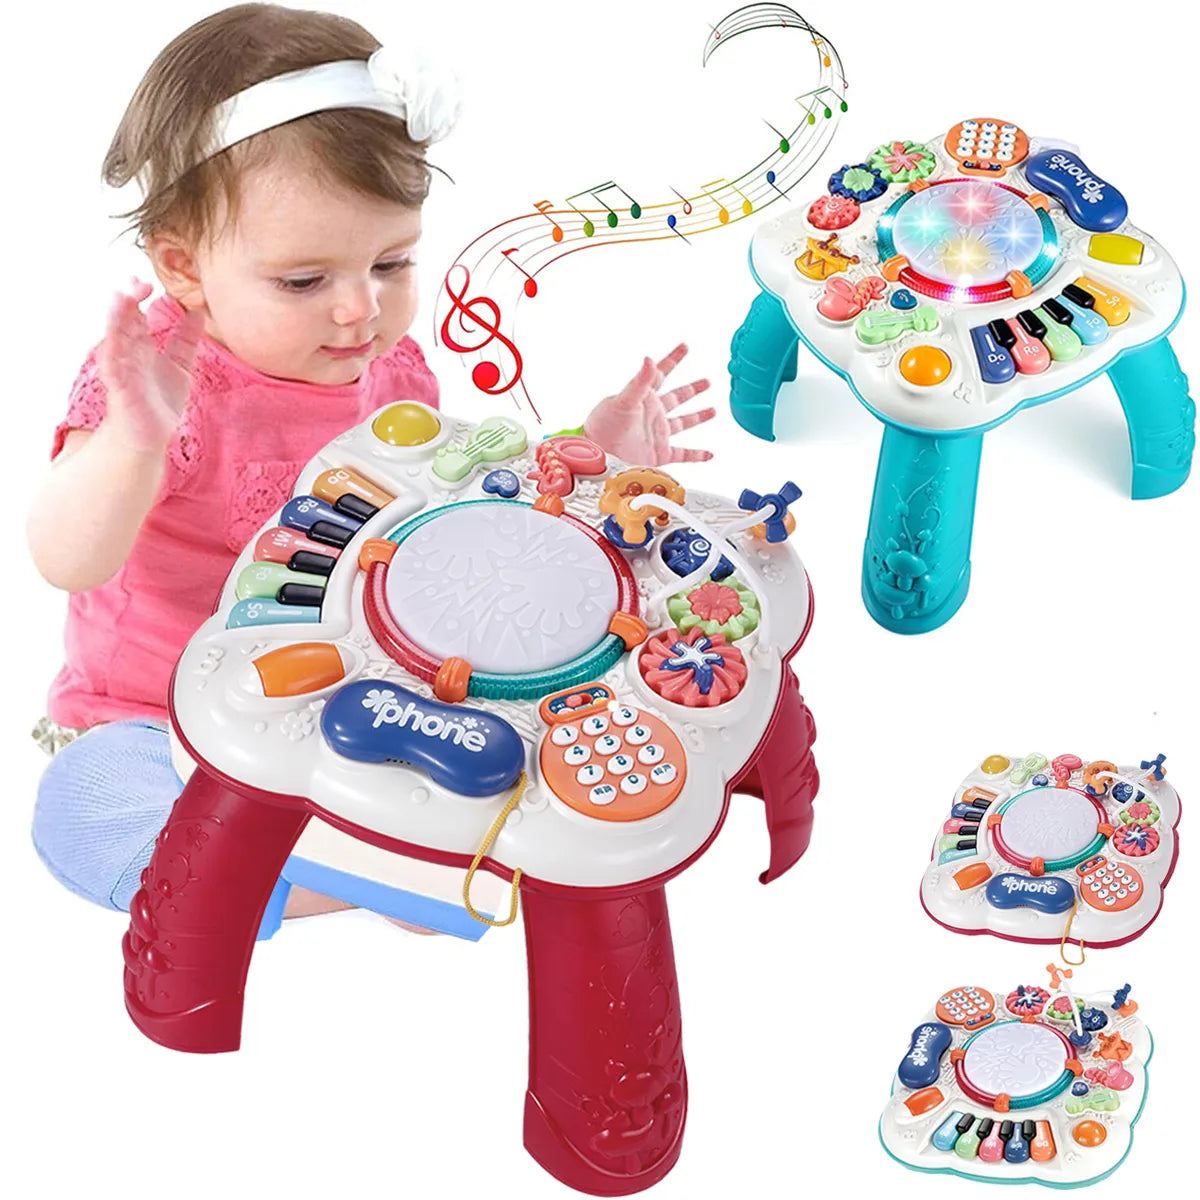 Multi-Functional Baby Activity Table with Musical Educational and Developmental Sensory for Babies